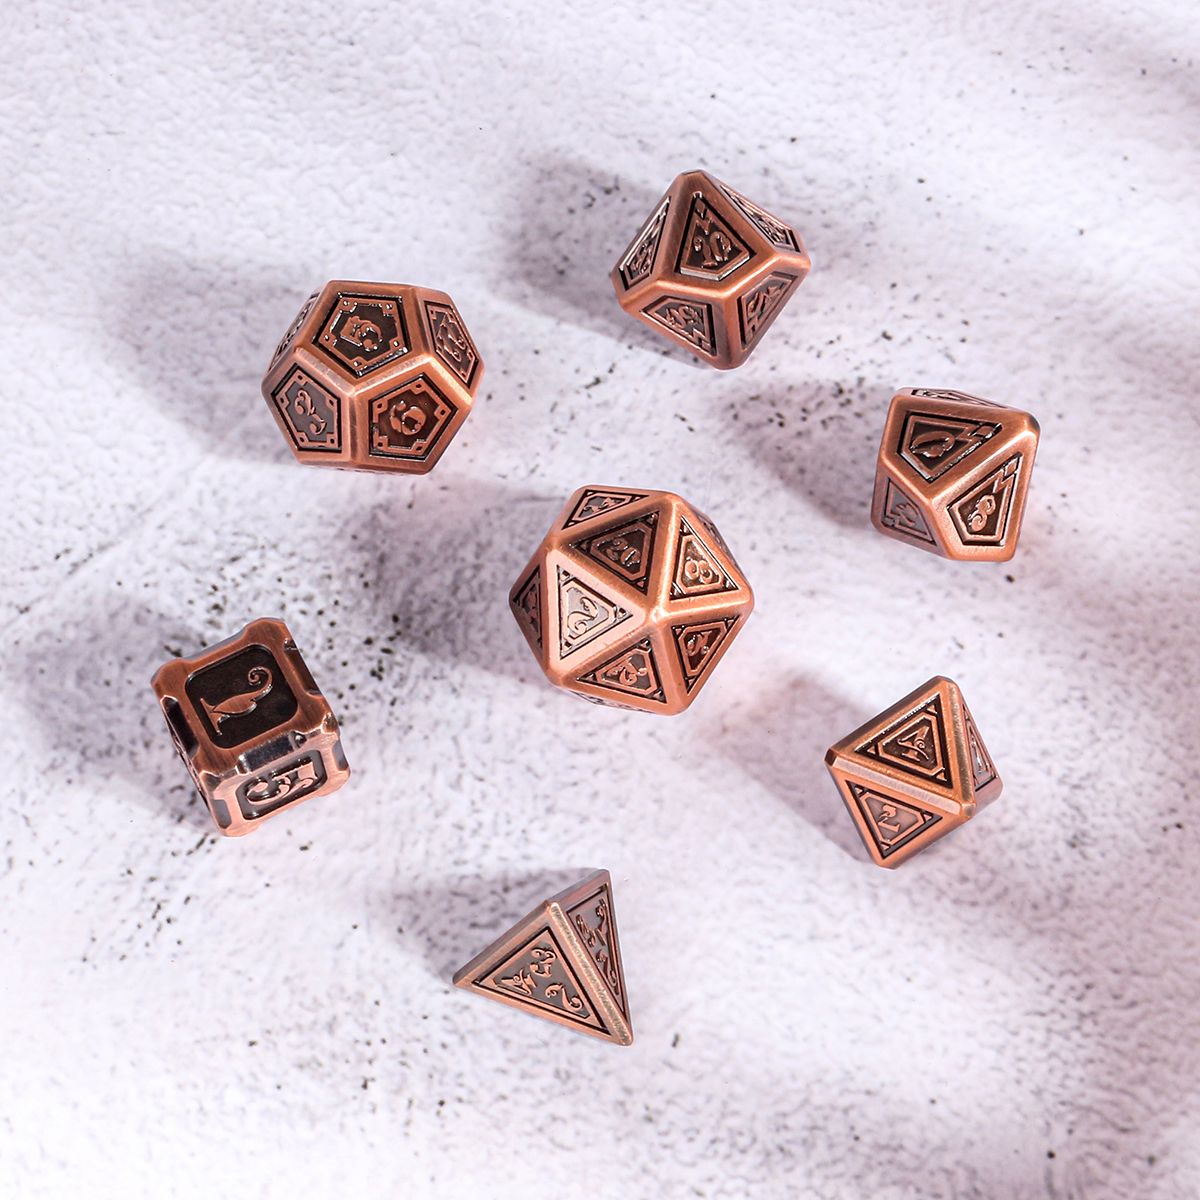 7pcs-Set-Embossed-Heavy-Metal-Polyhedral-Dices-DND-RPG-MTG-Role-Playing-Board-Game-Dices-Set-Zinc-Al-1608119